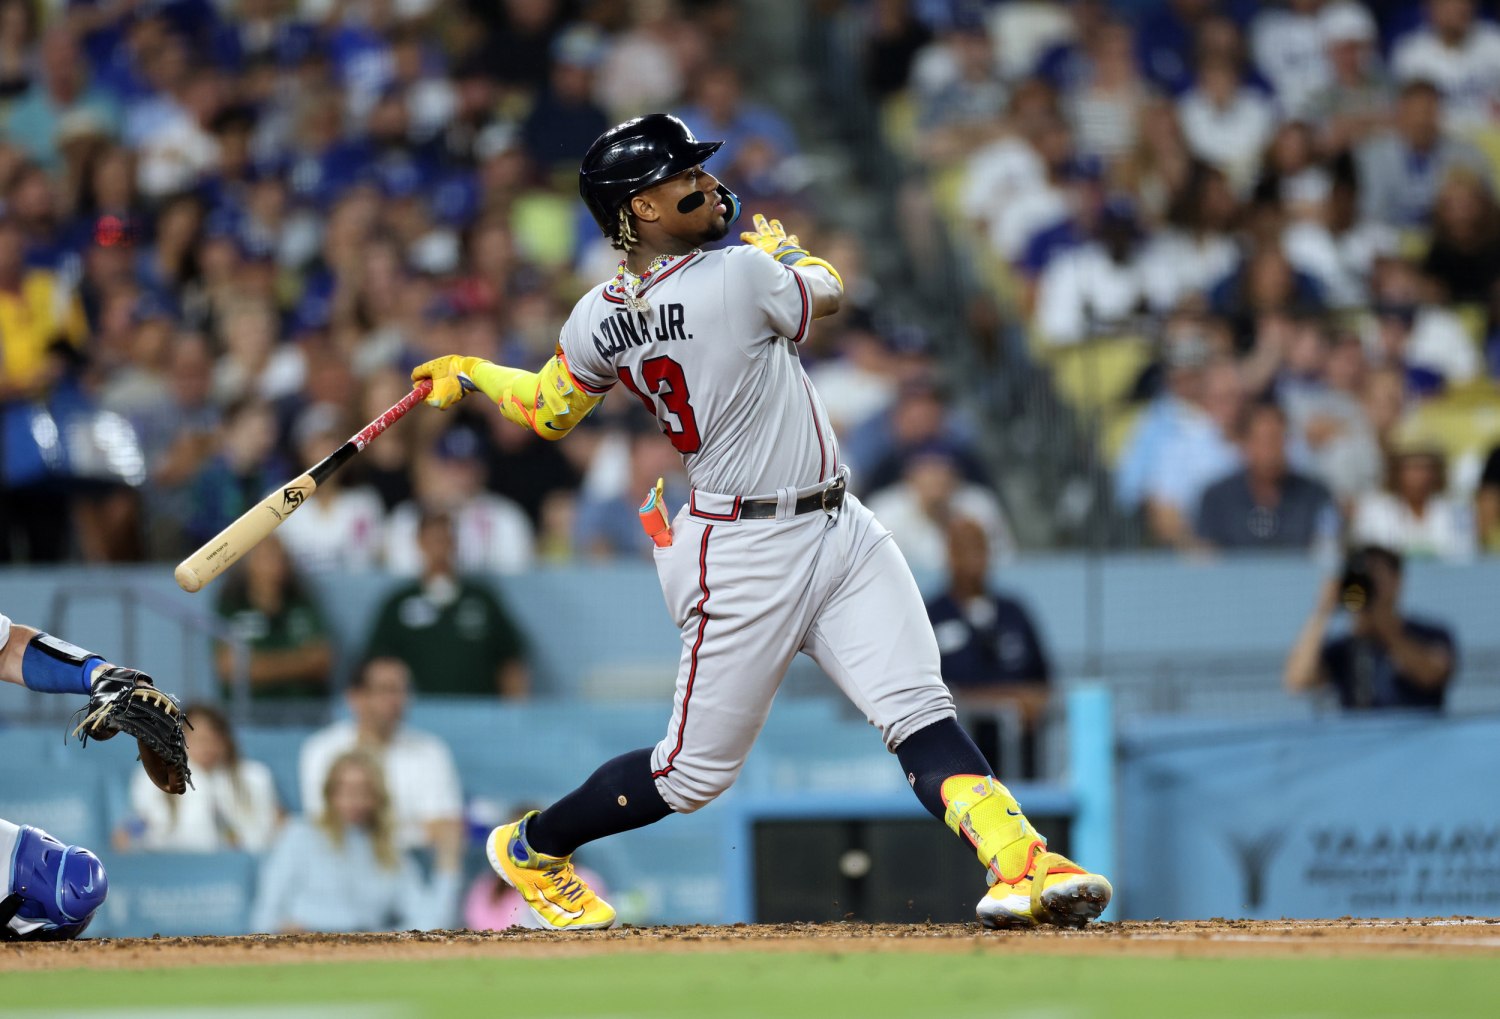 Braves outfielder Ronald Acuña Jr. goes from first to third on a 